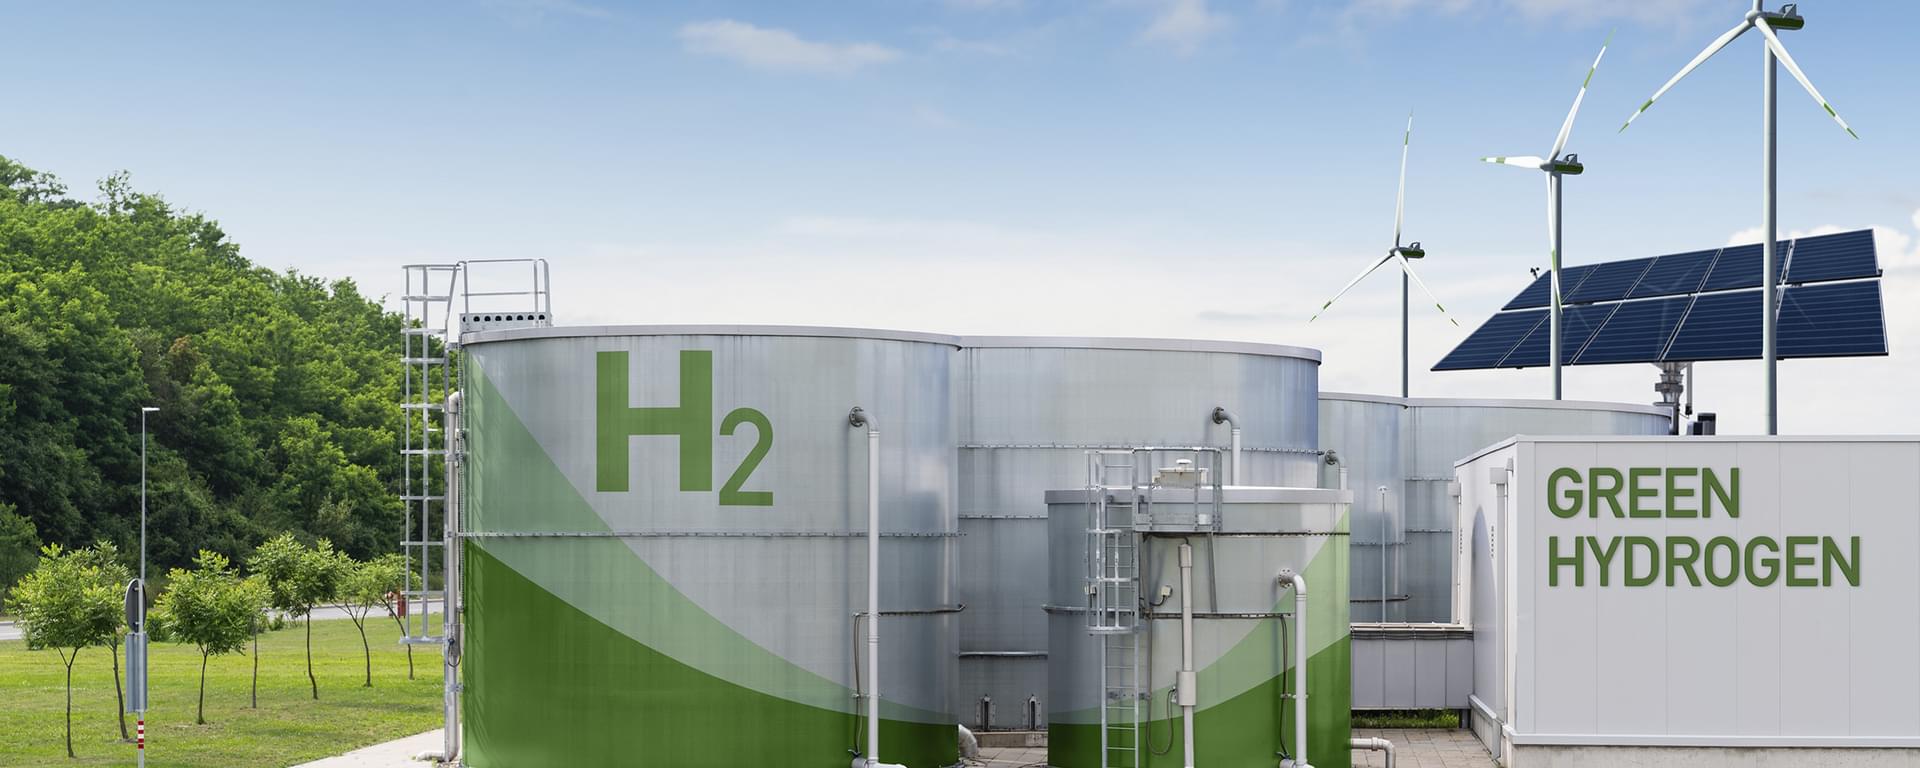 Green hydrogen factory concept - hydrogen production from renewable energy sources